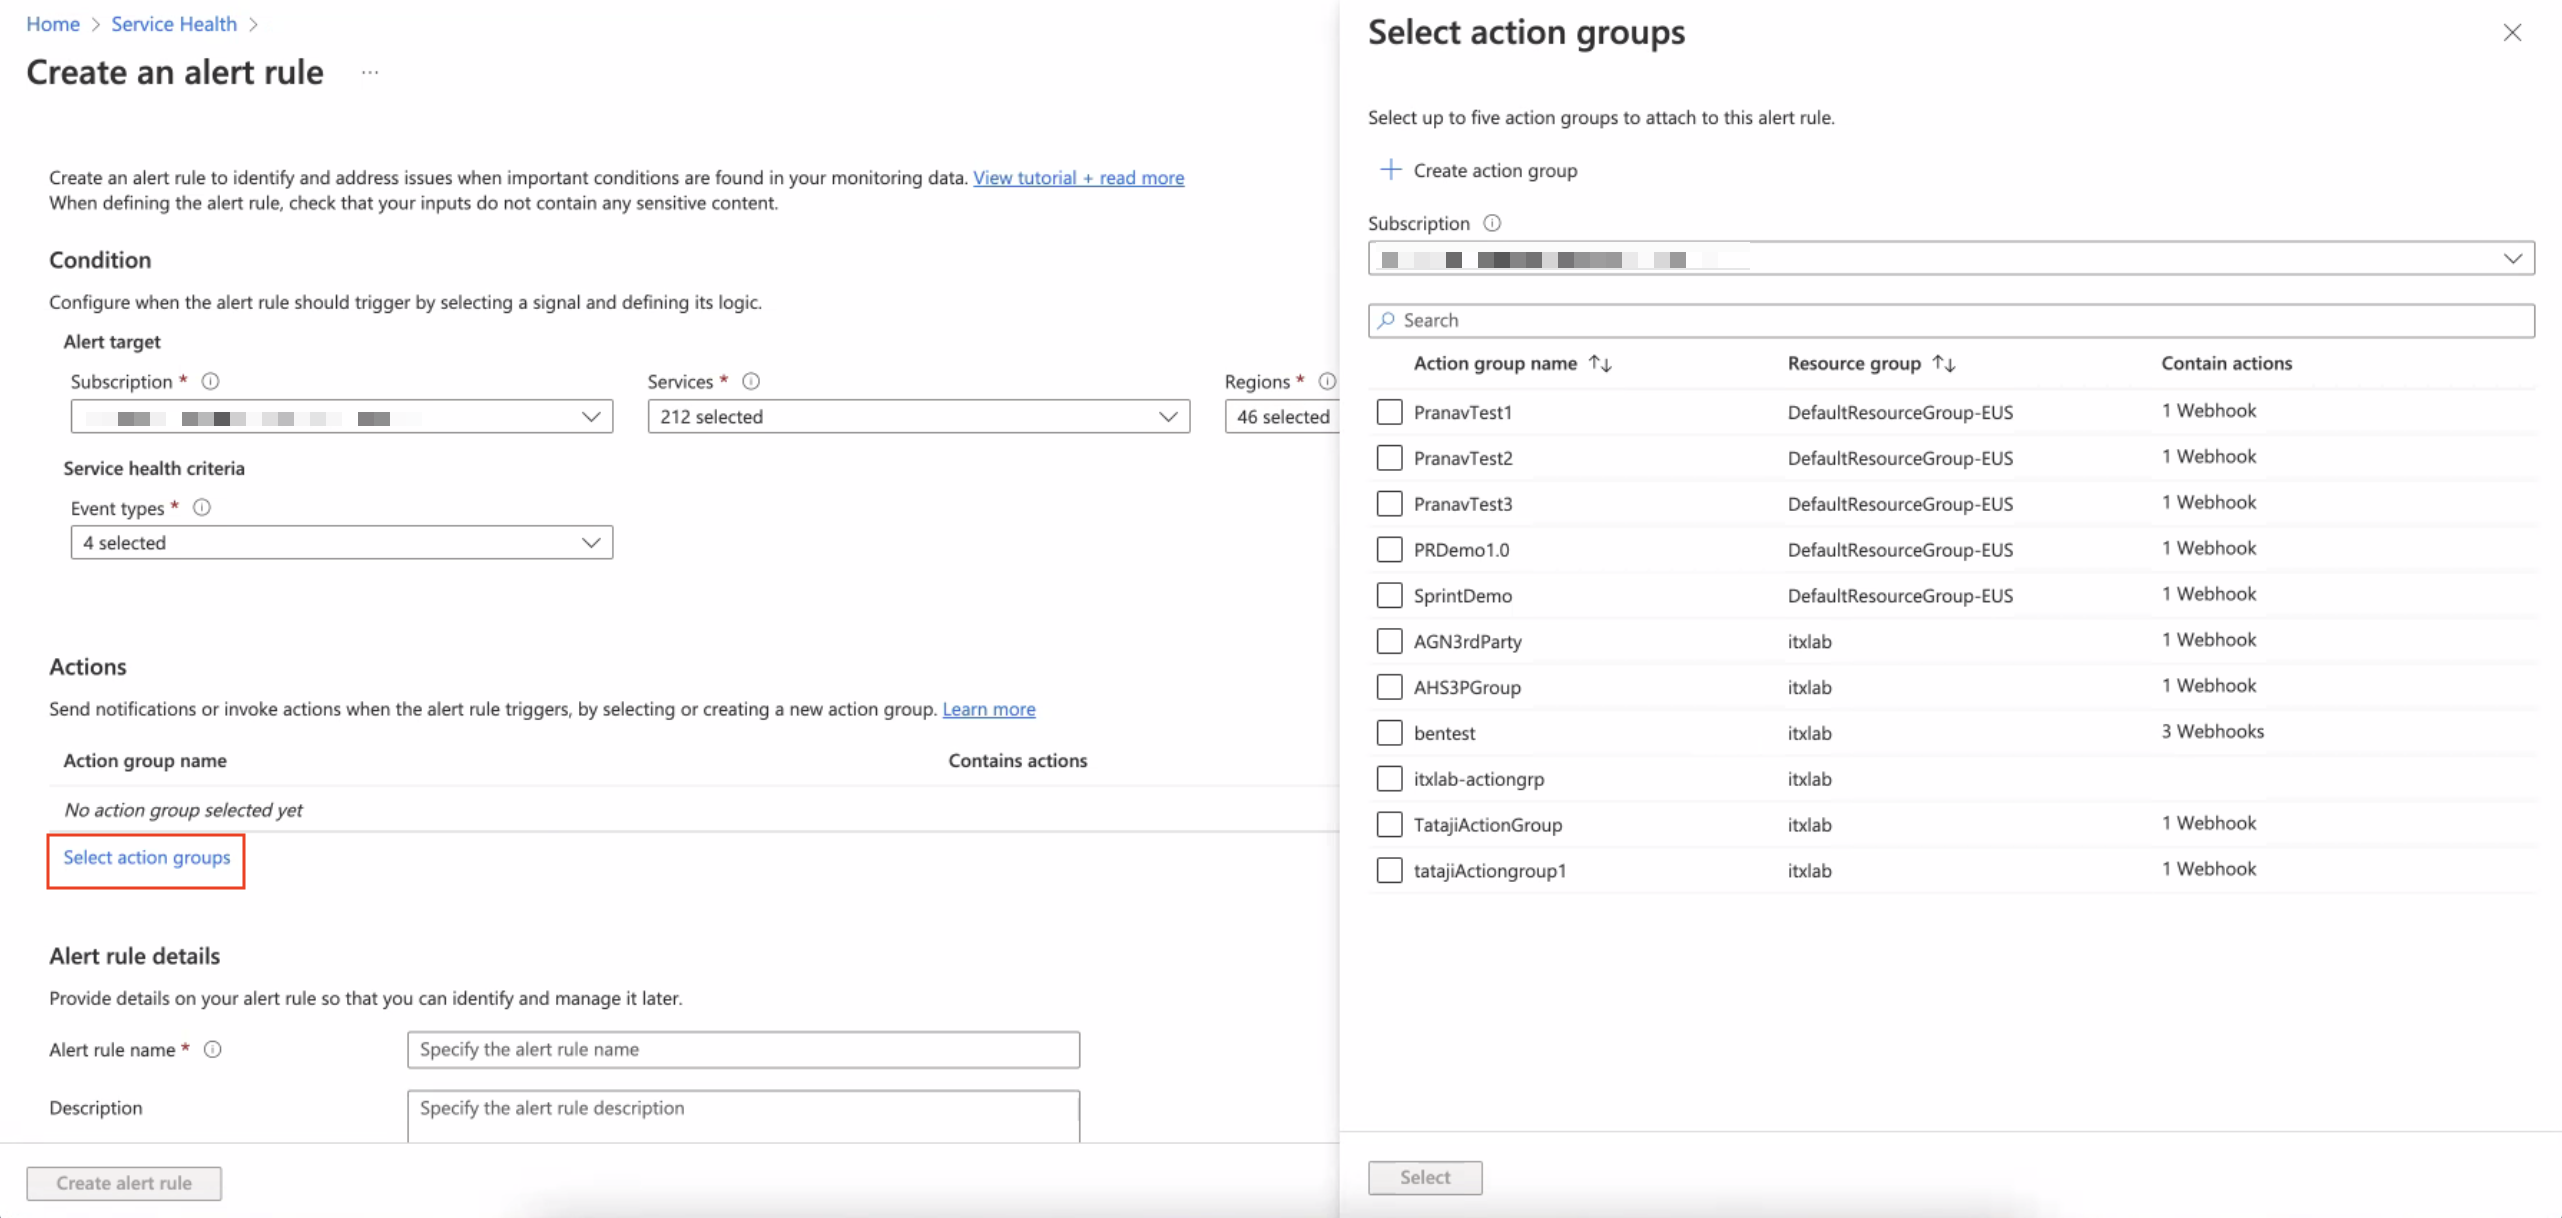 Page to select an action group.